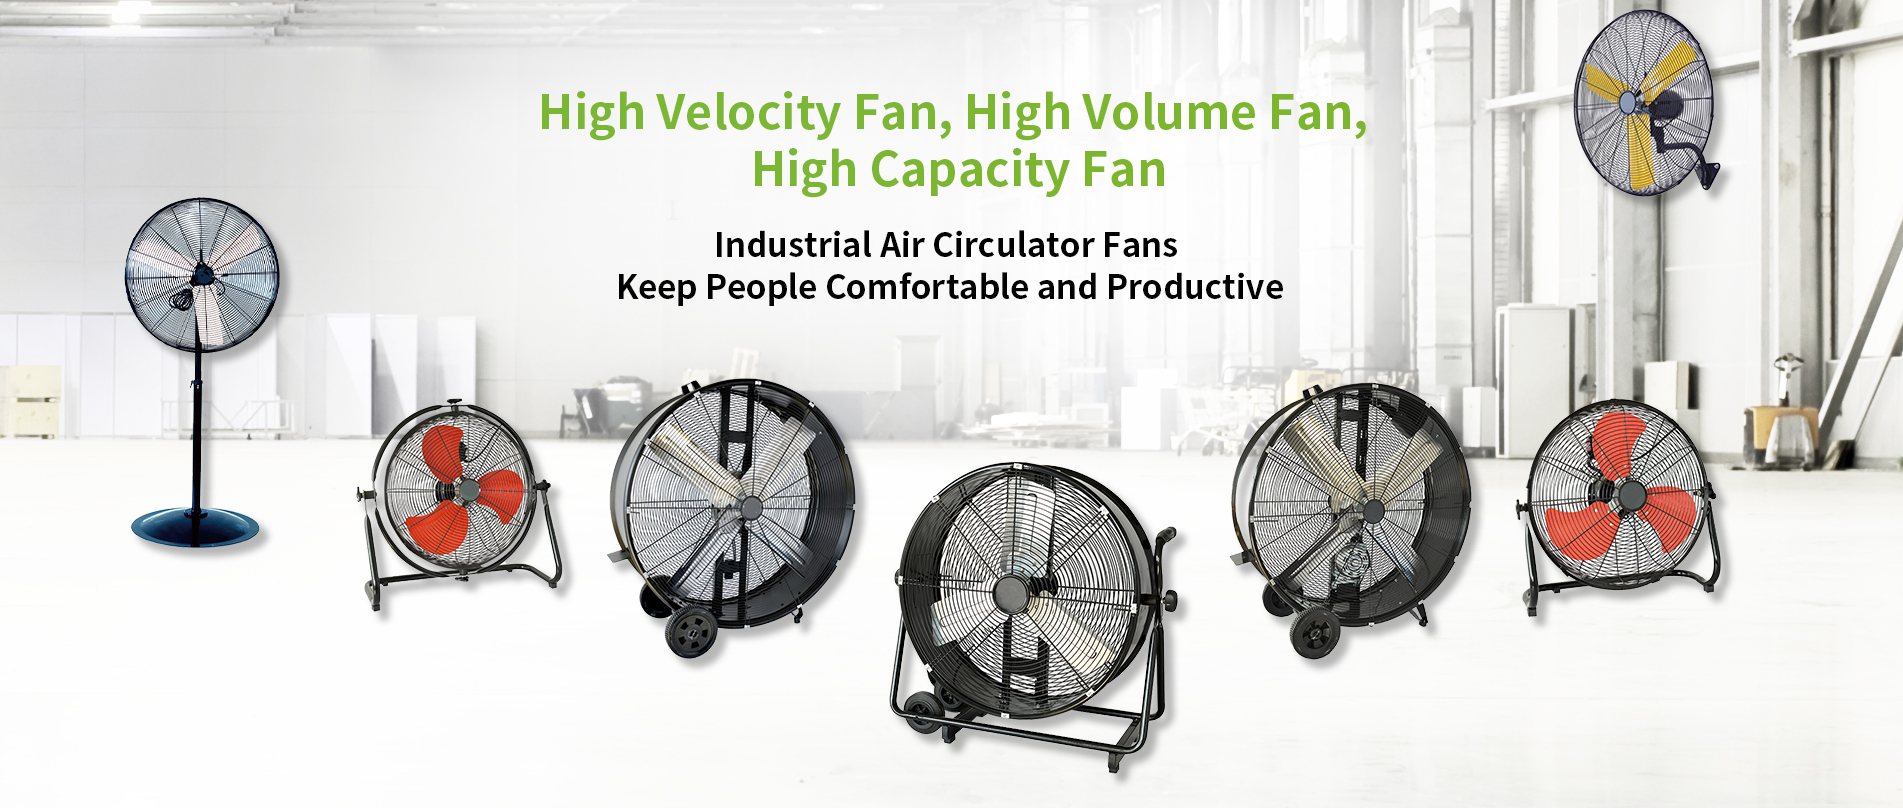 WINMORE Industrial Fans